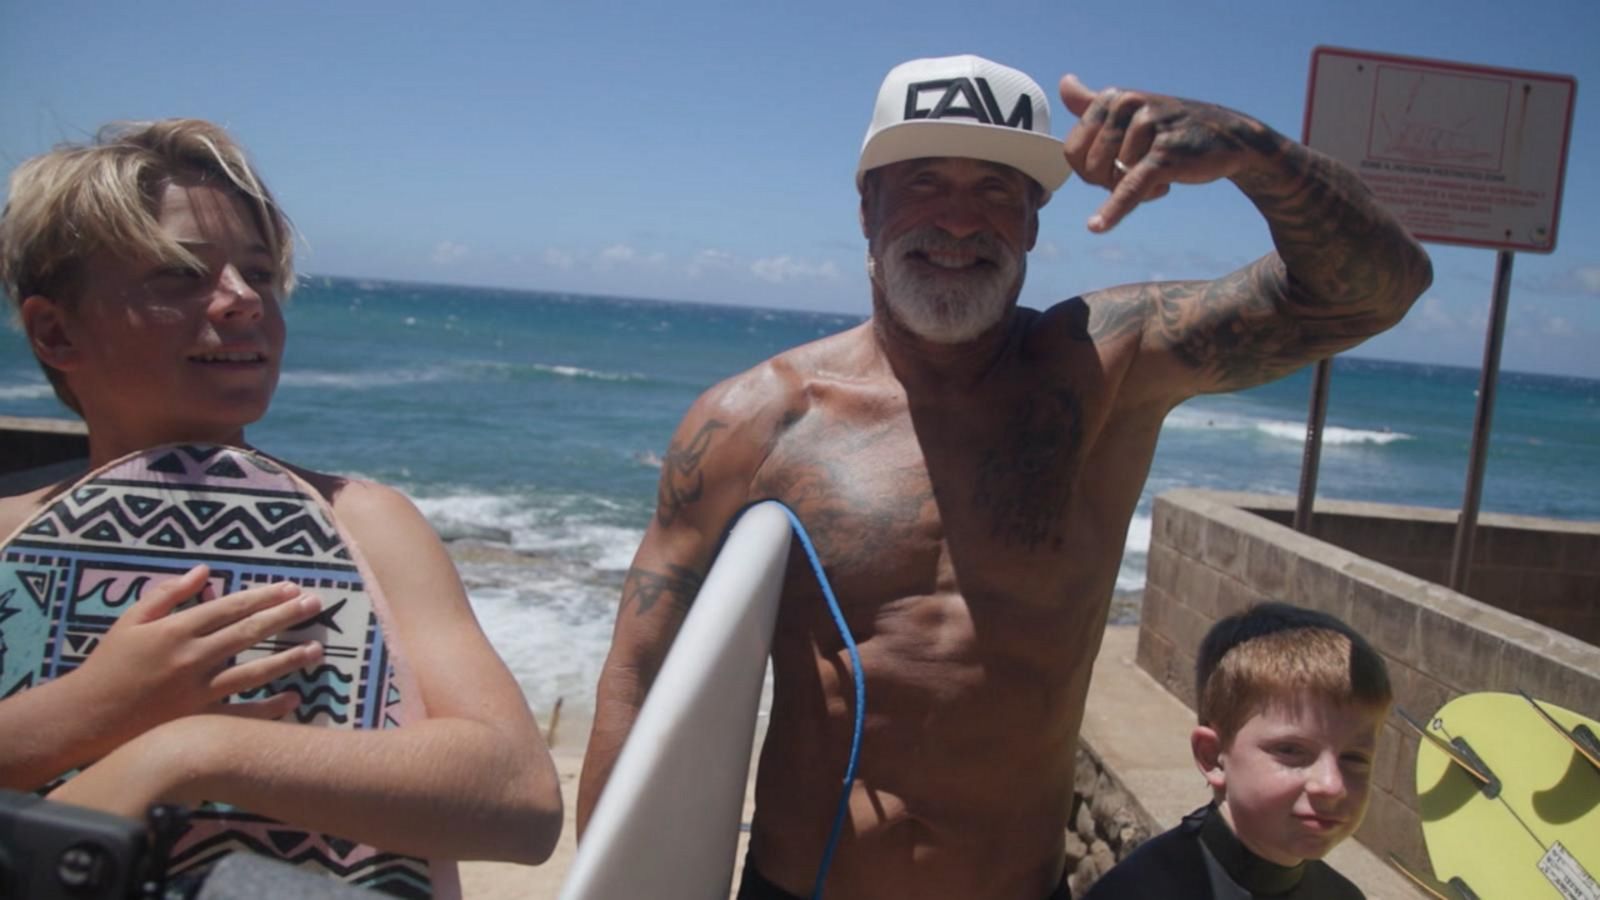 VIDEO: Maui surf instructor who lost home in wildfires continues to help community